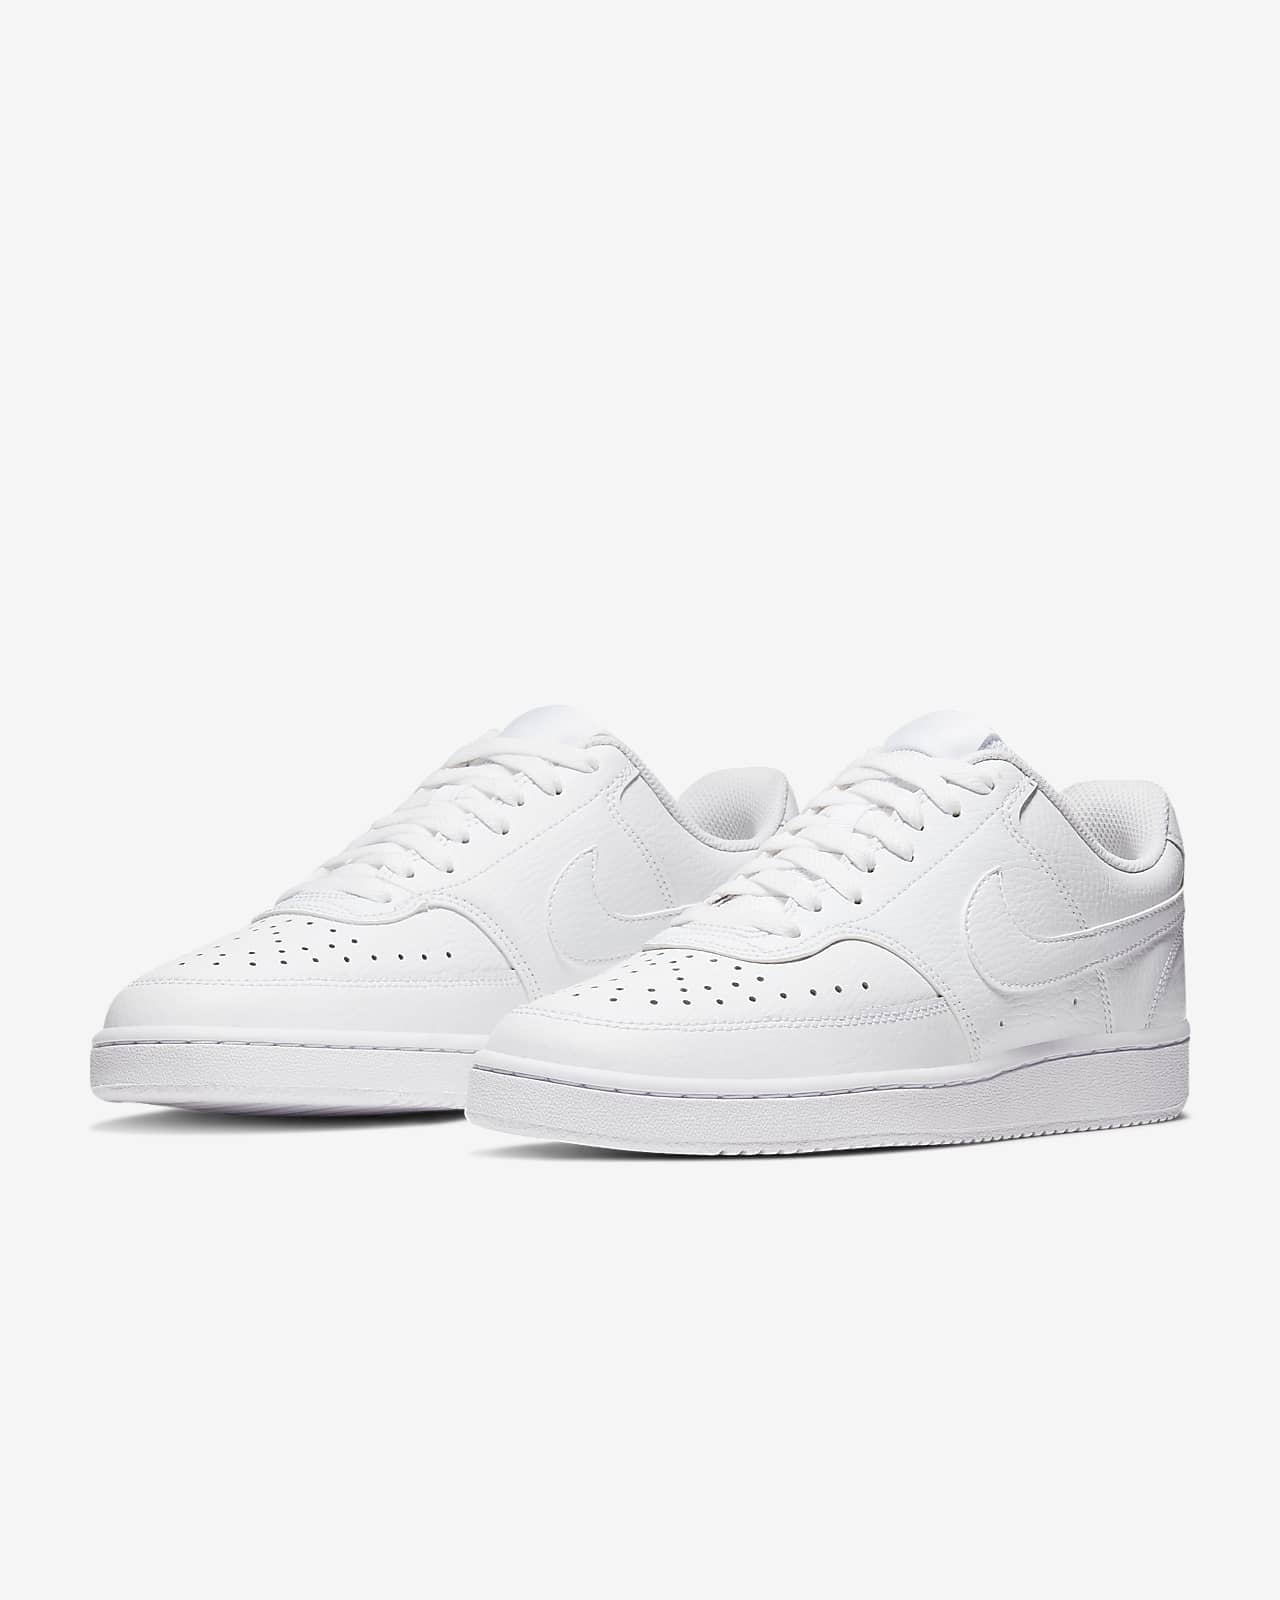 nike white shoes womens price philippines